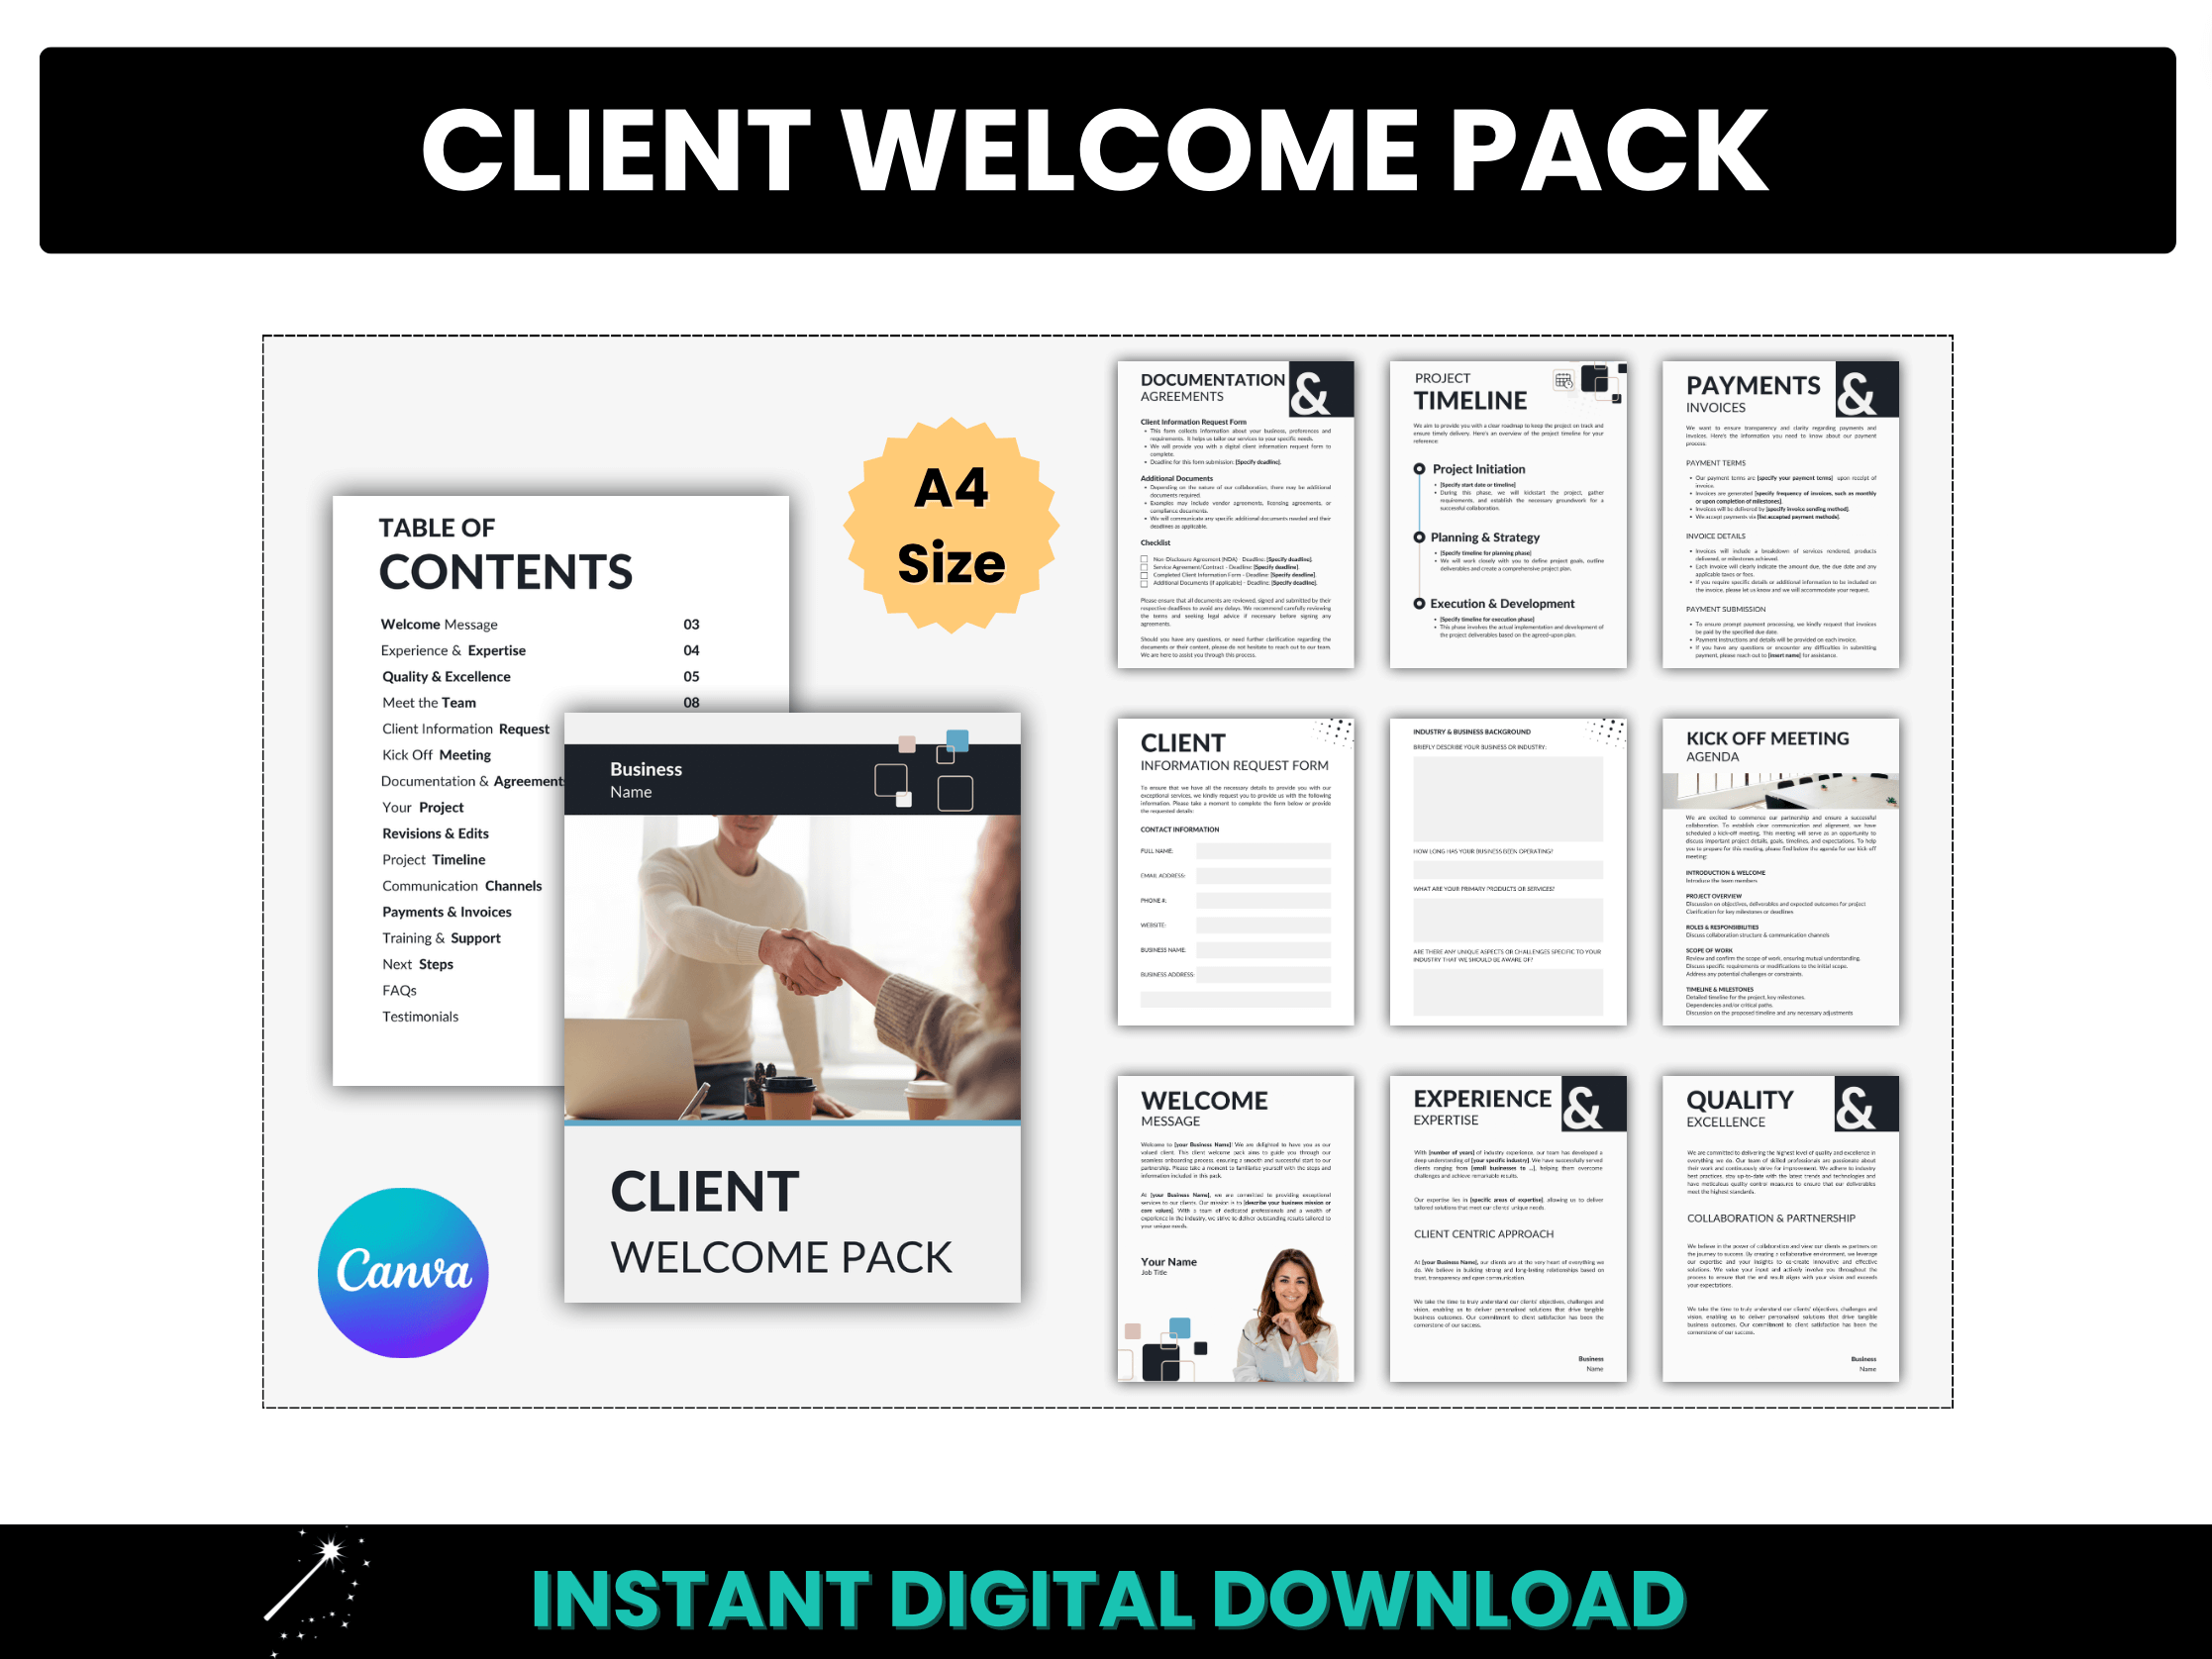 Client Welcome Pack - A4 Size Canva Template